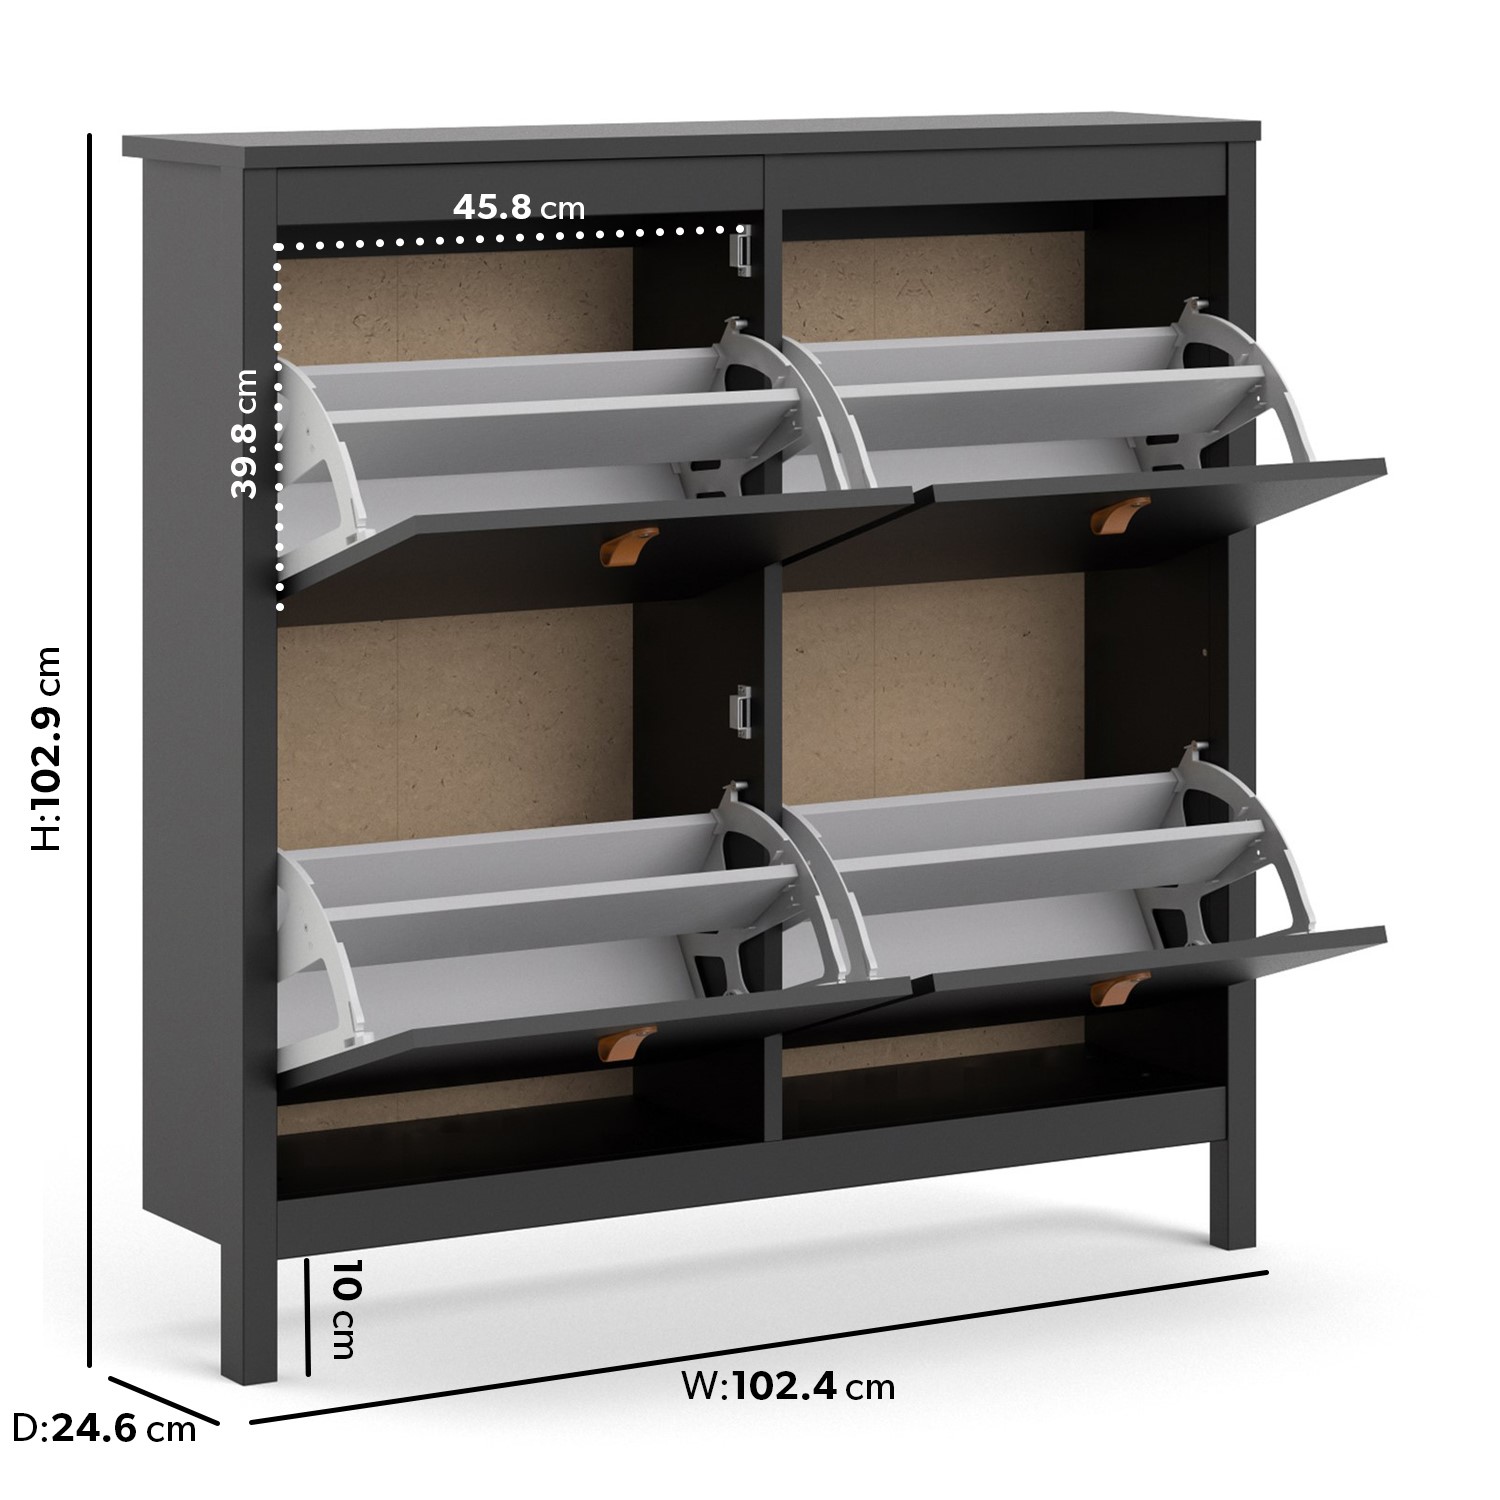 Read more about Black shoe cabinet with 4 compartments barcelona